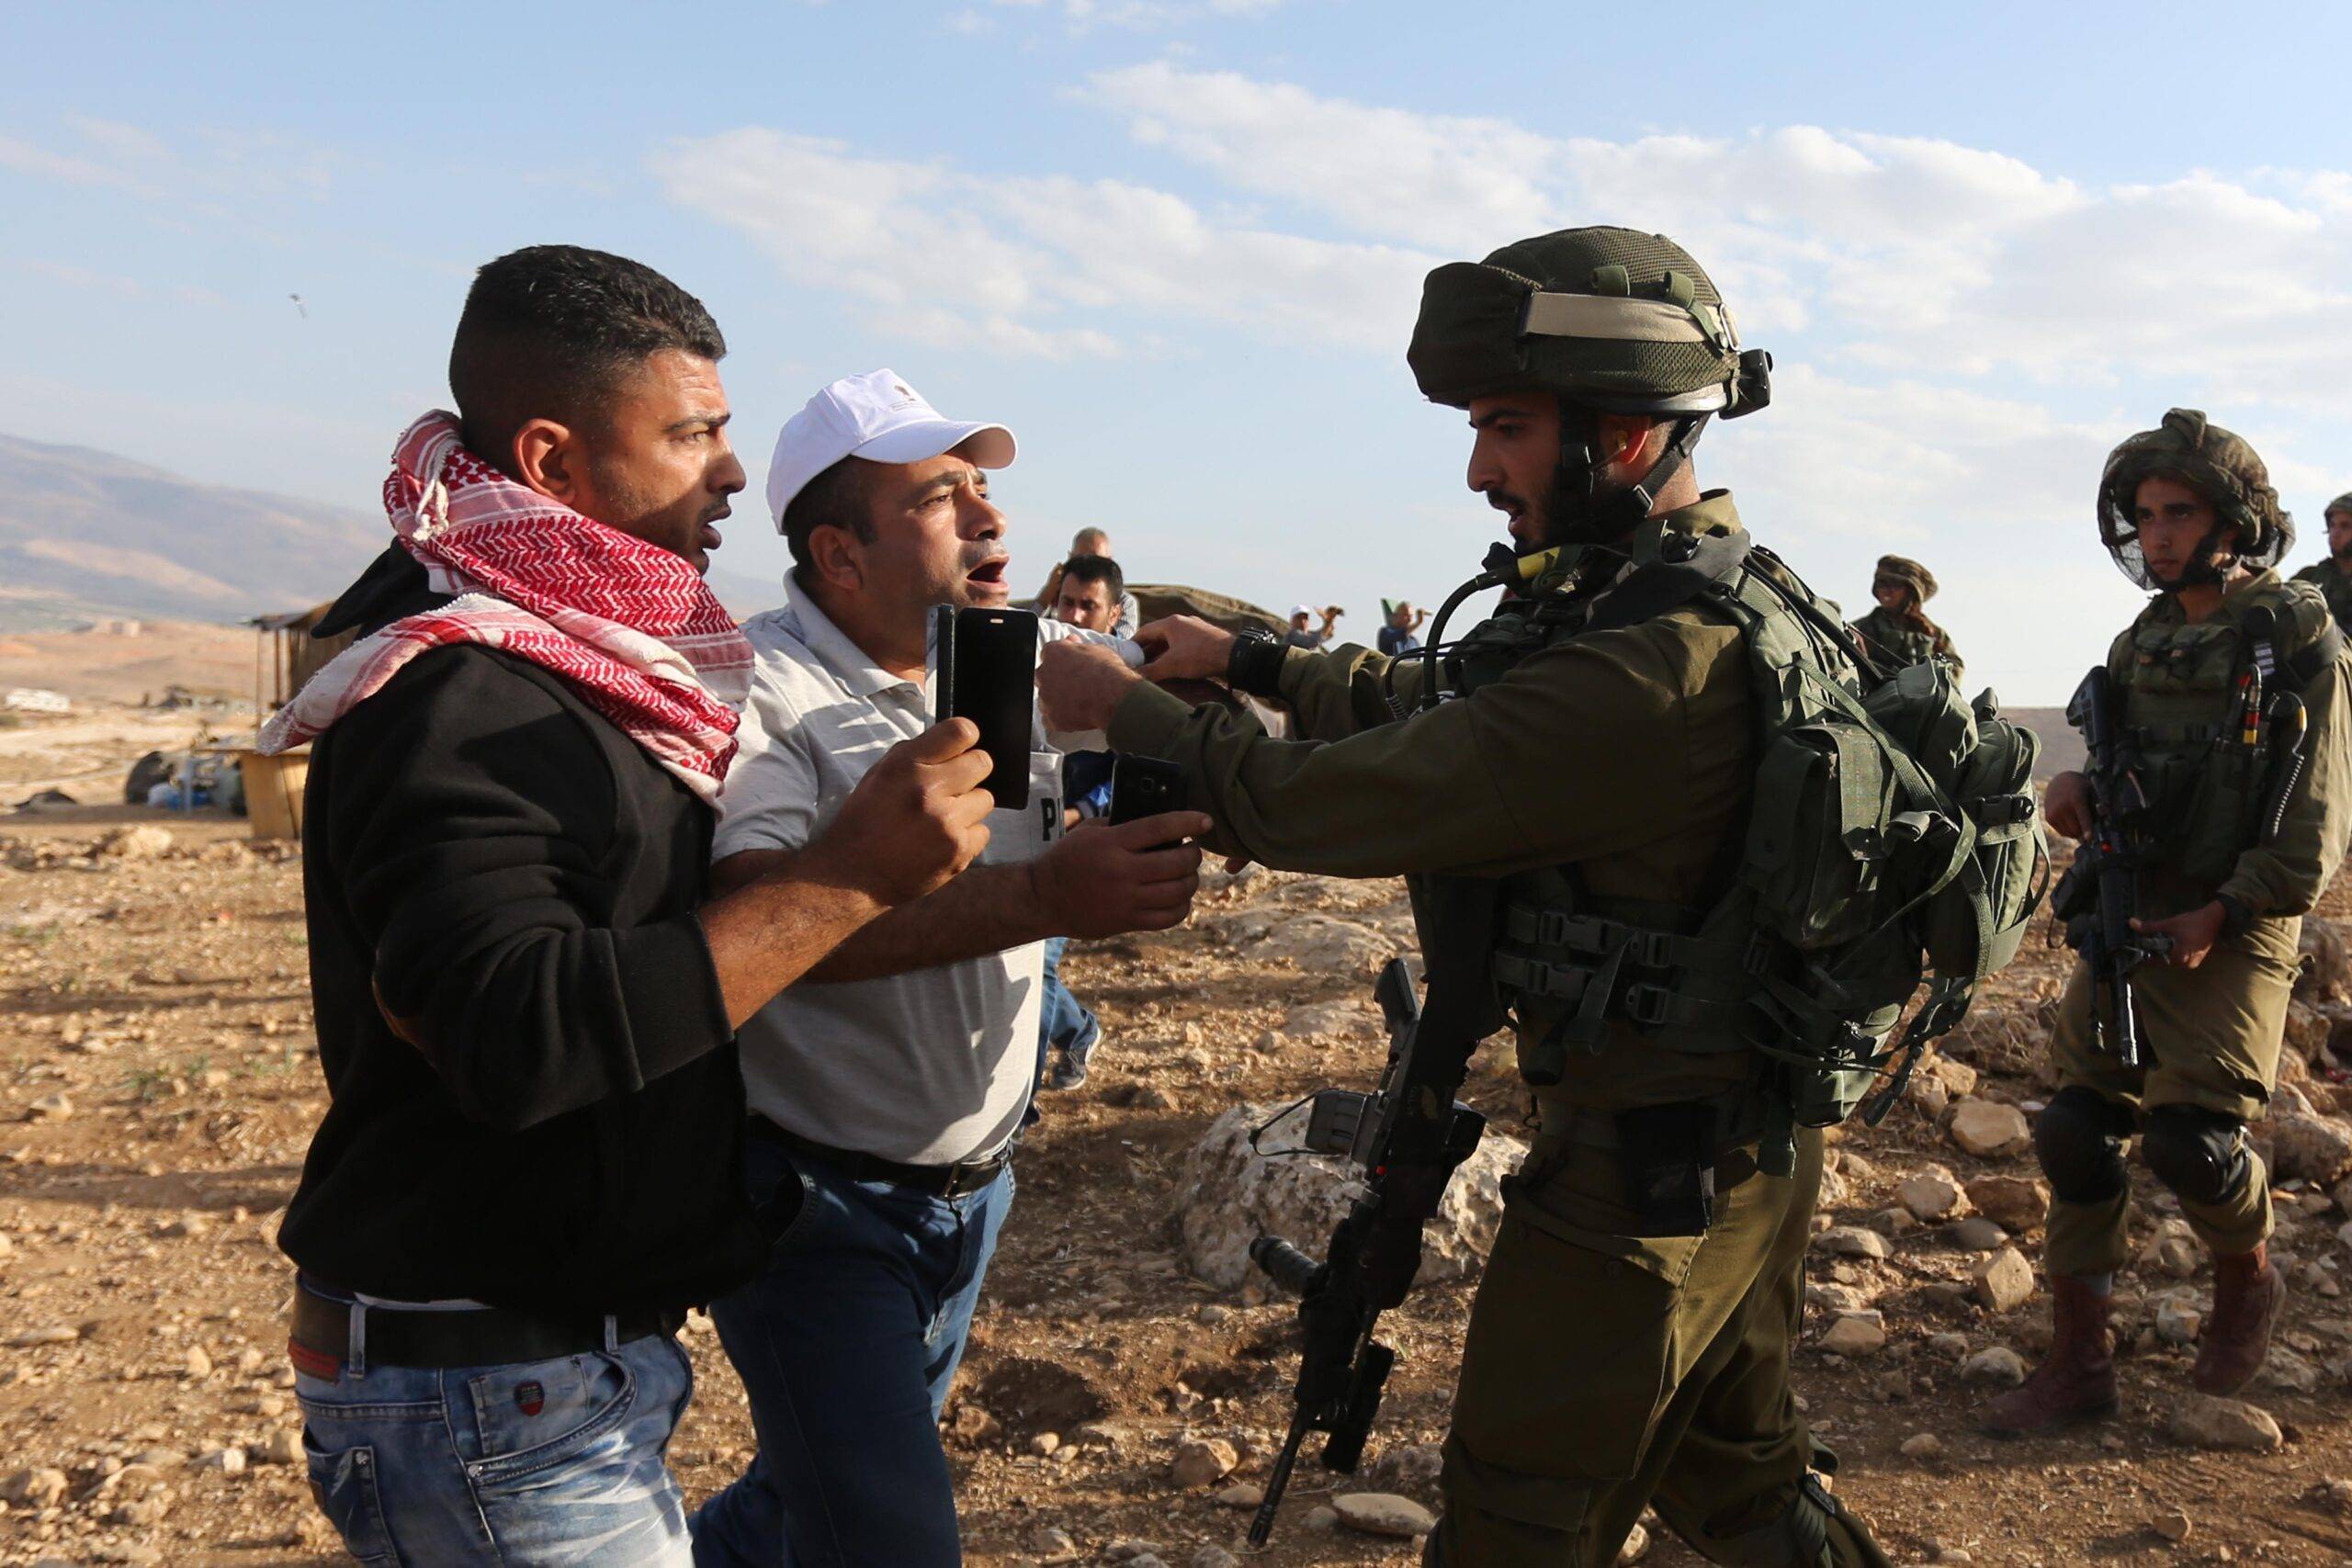 JERICHO, WEST BANK: Israeli security forces intervene Palestinian protesters with real and plastic bullets and tear gas during a demonstration at the symbolic region named 'Yasser Arafat Village' in Al-Agvar region of Jericho, West Bank on November 17, 2016. ( Issam Rimawi - Anadolu Agency )